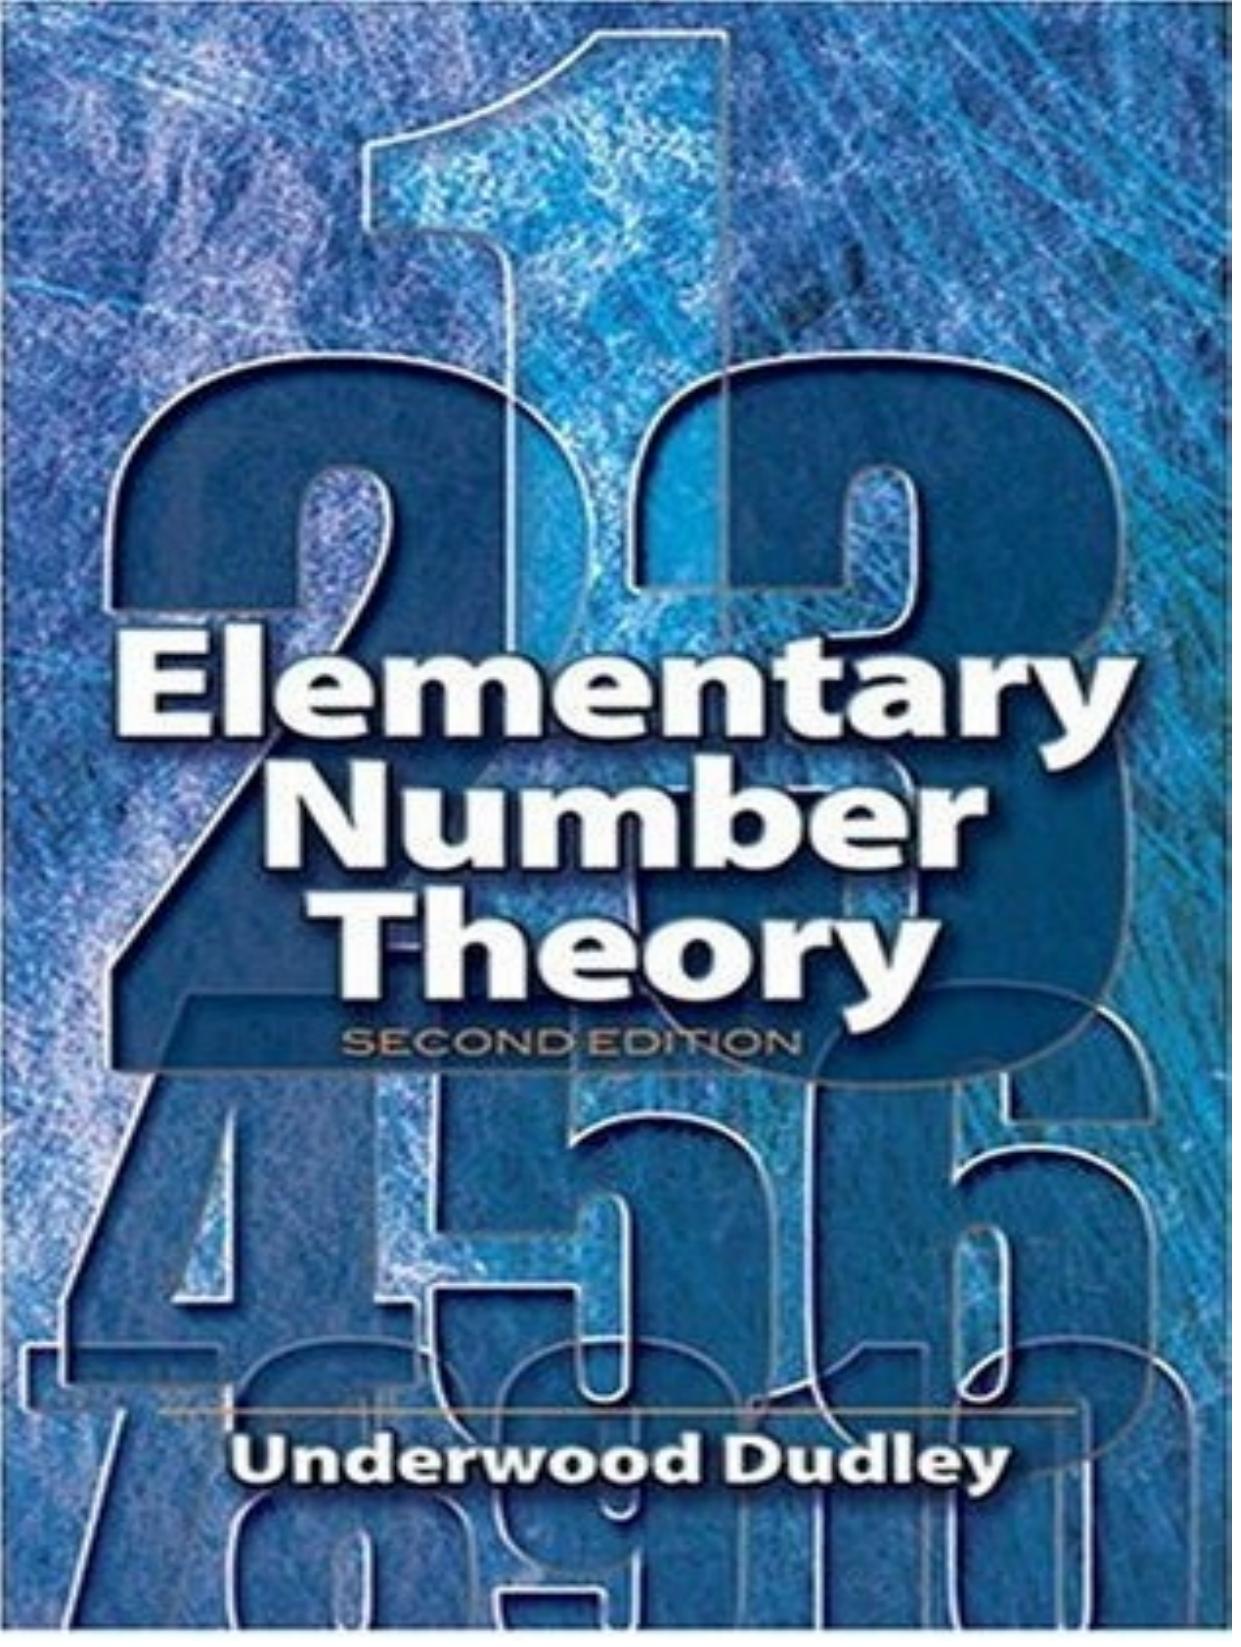 Elementary Number Theory 2nd - Underwood Dudley.jpg